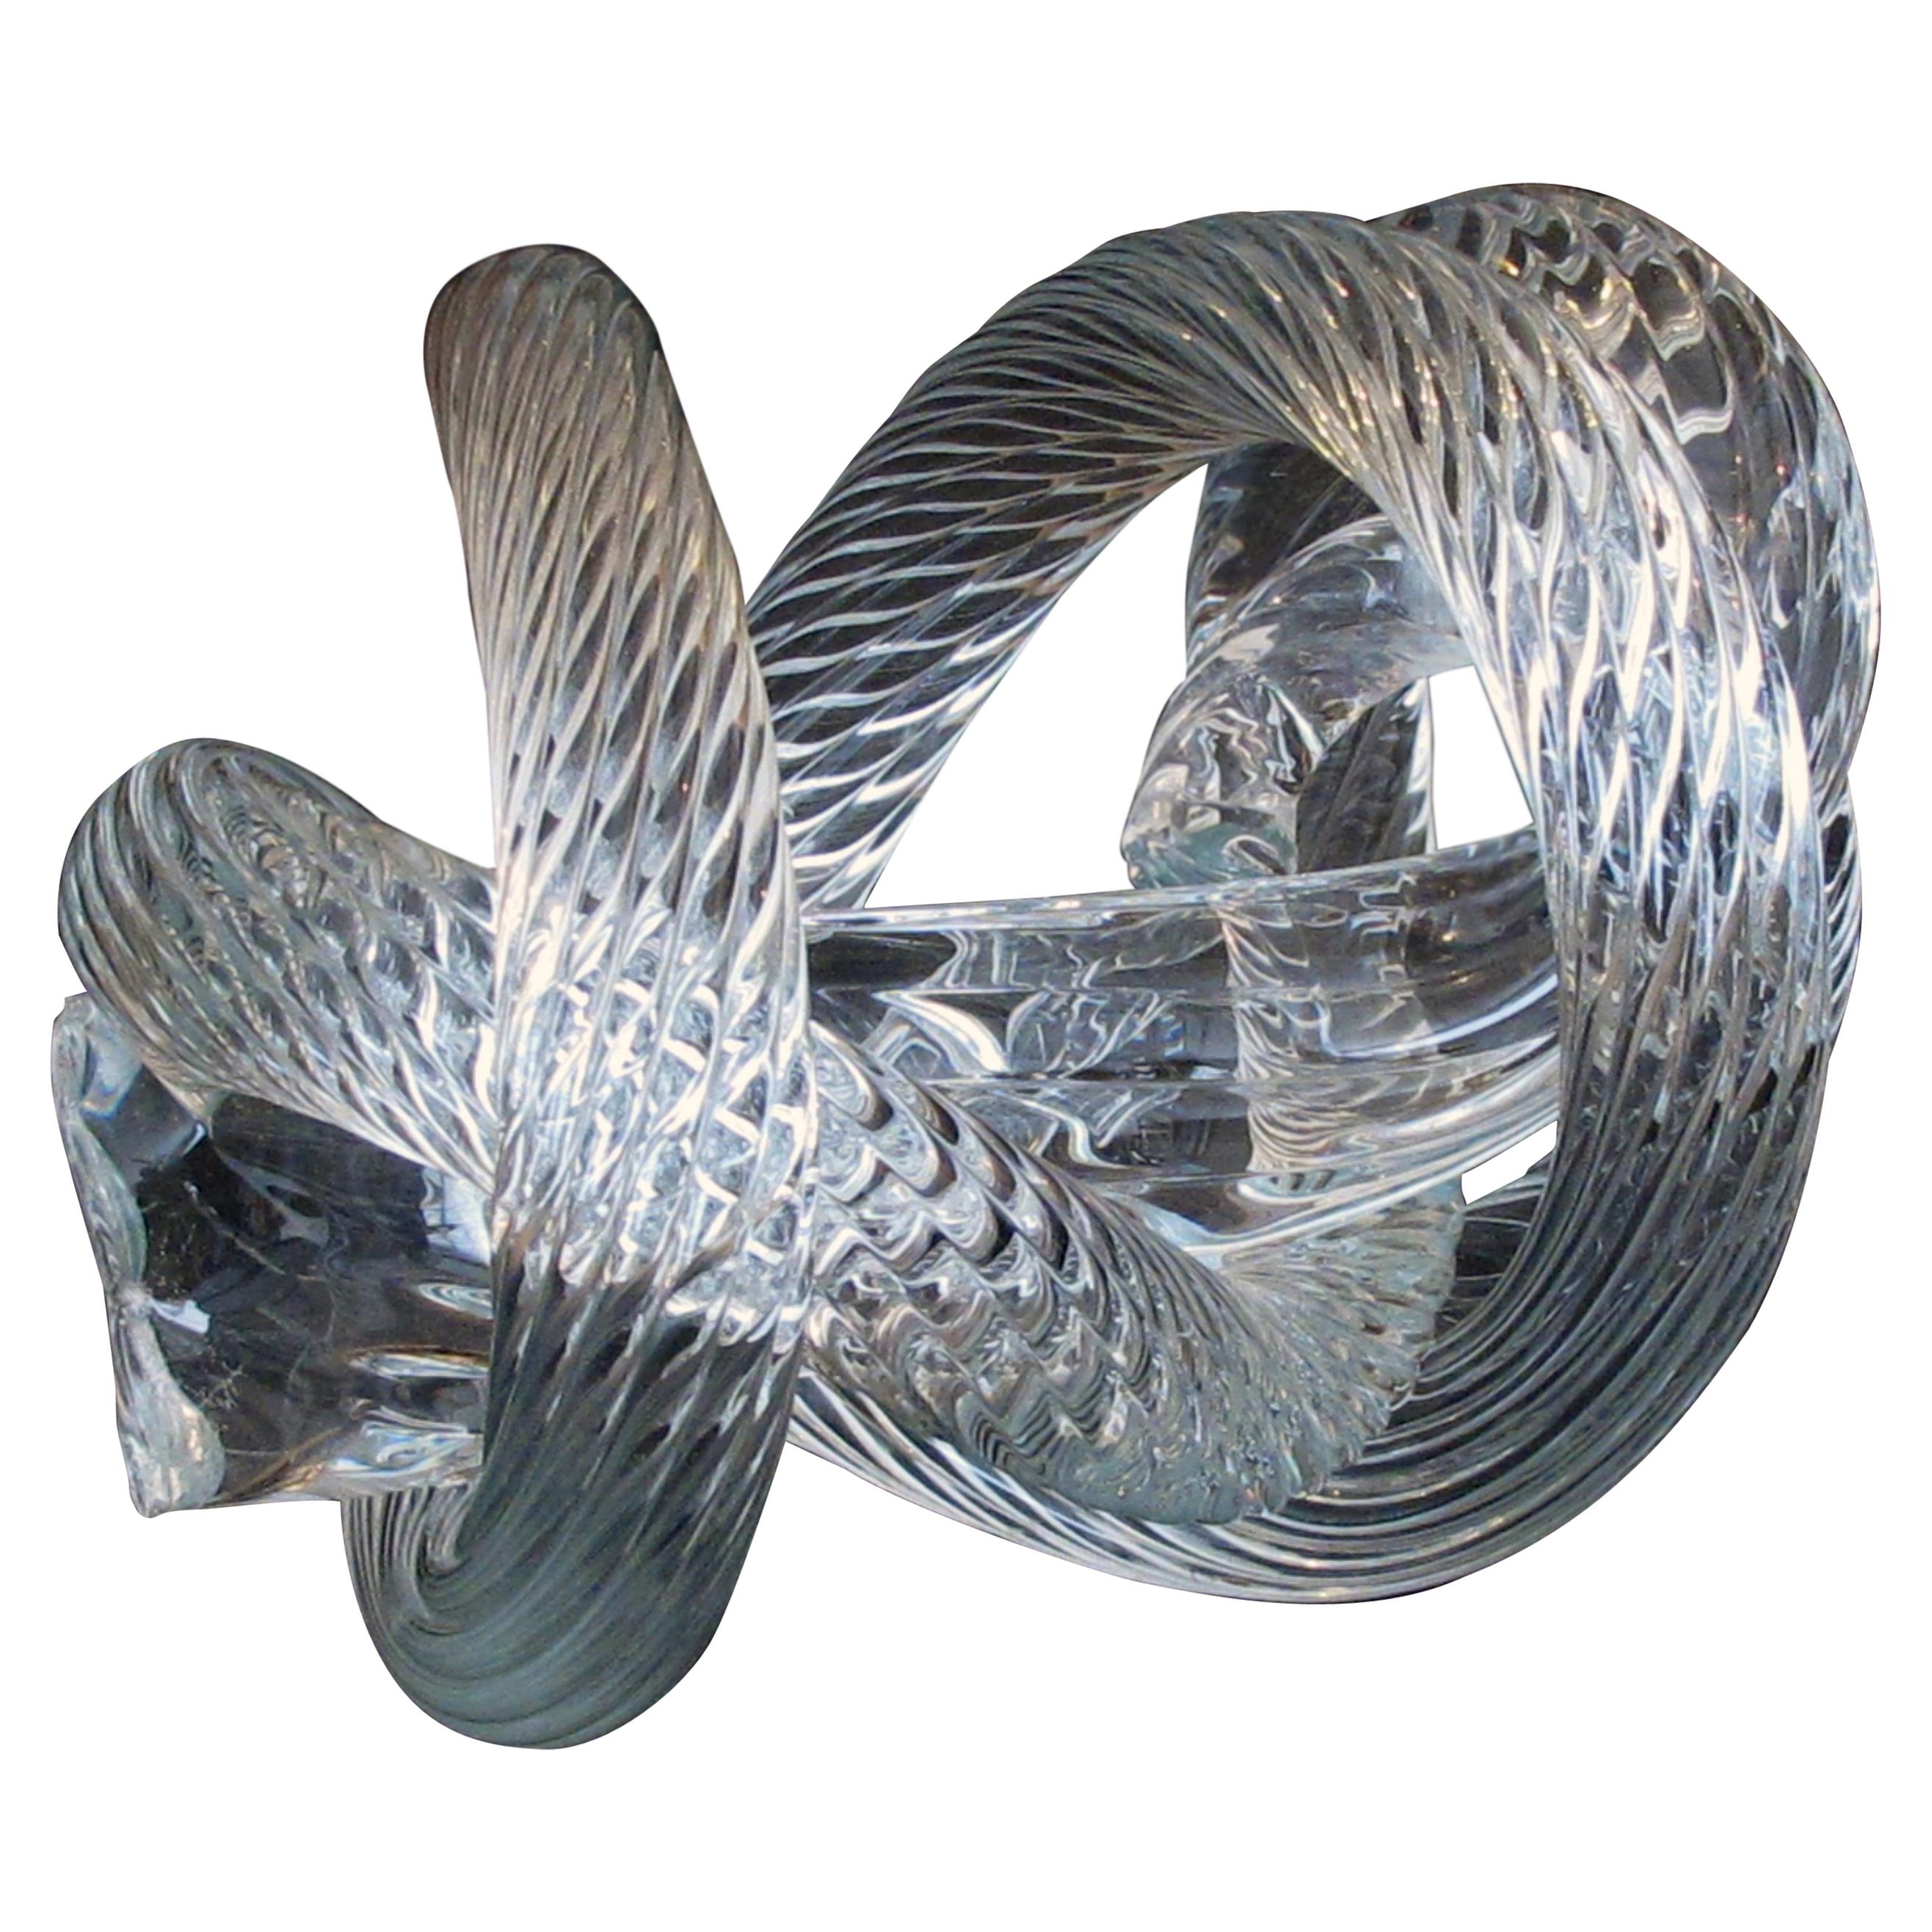 Well-Crafted and Heavy Glass Rope Knot by Fusion Z Glassworks; Etched Signature